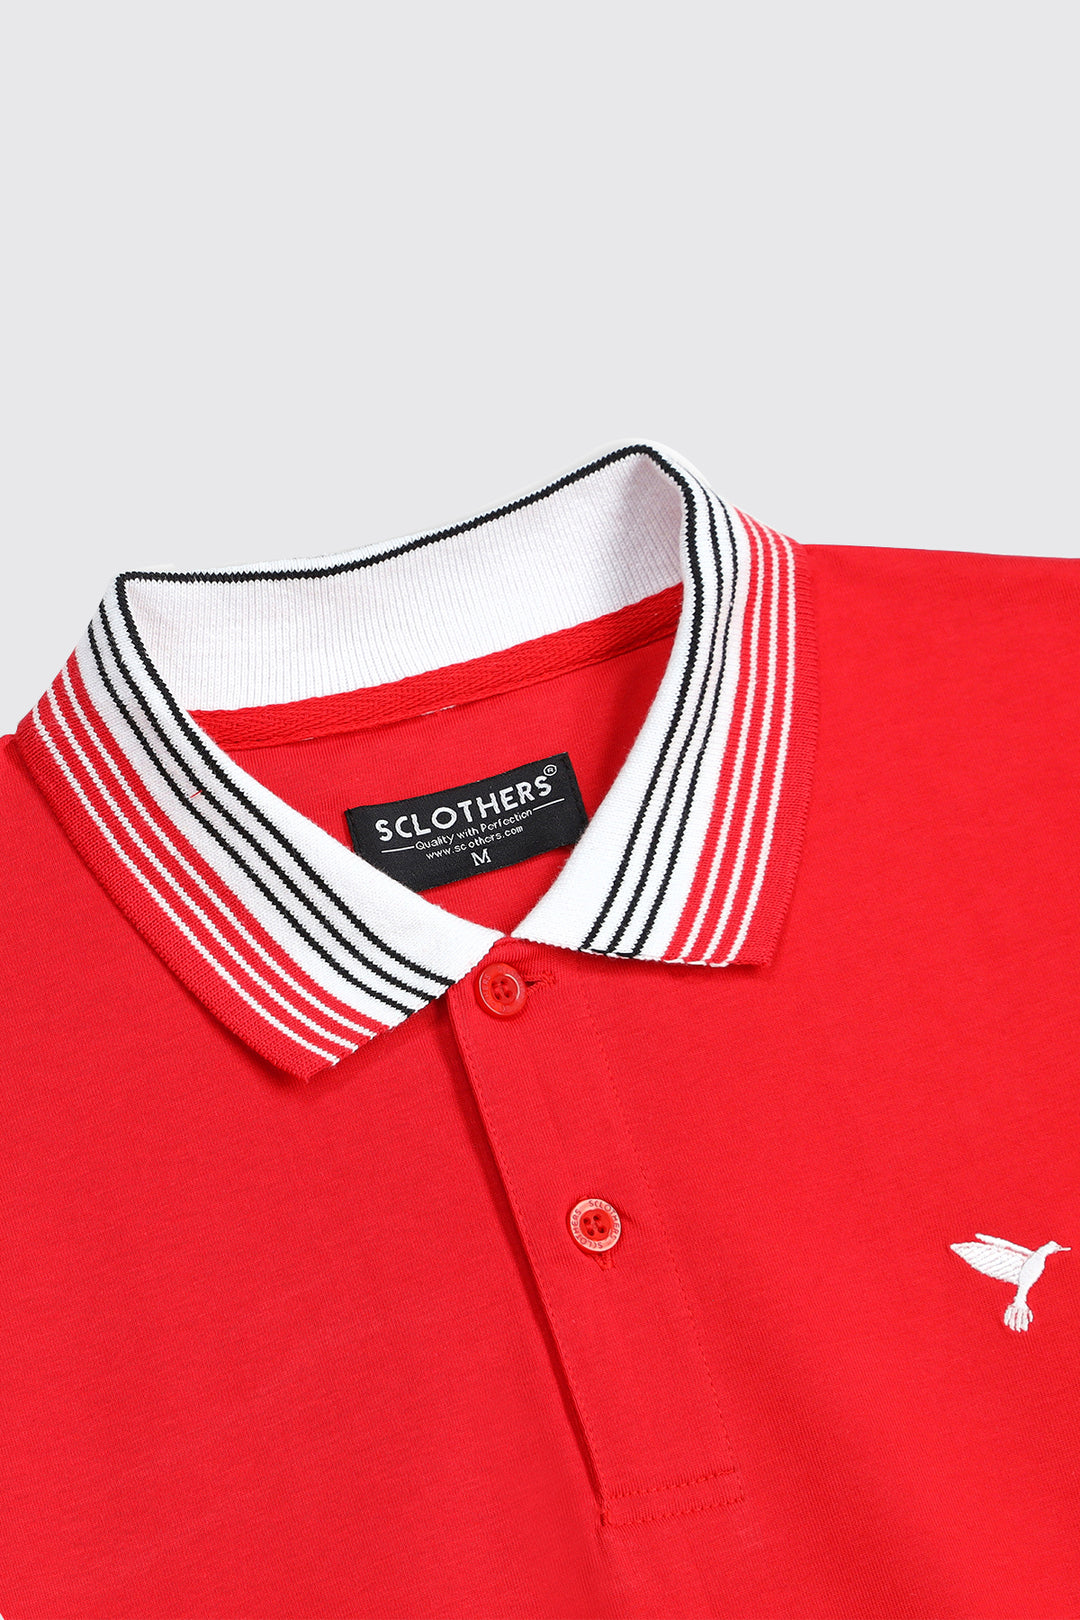 Red Contrast Jacquard Collar Polo Shirt (Plus Size) - A23 - MP0187P